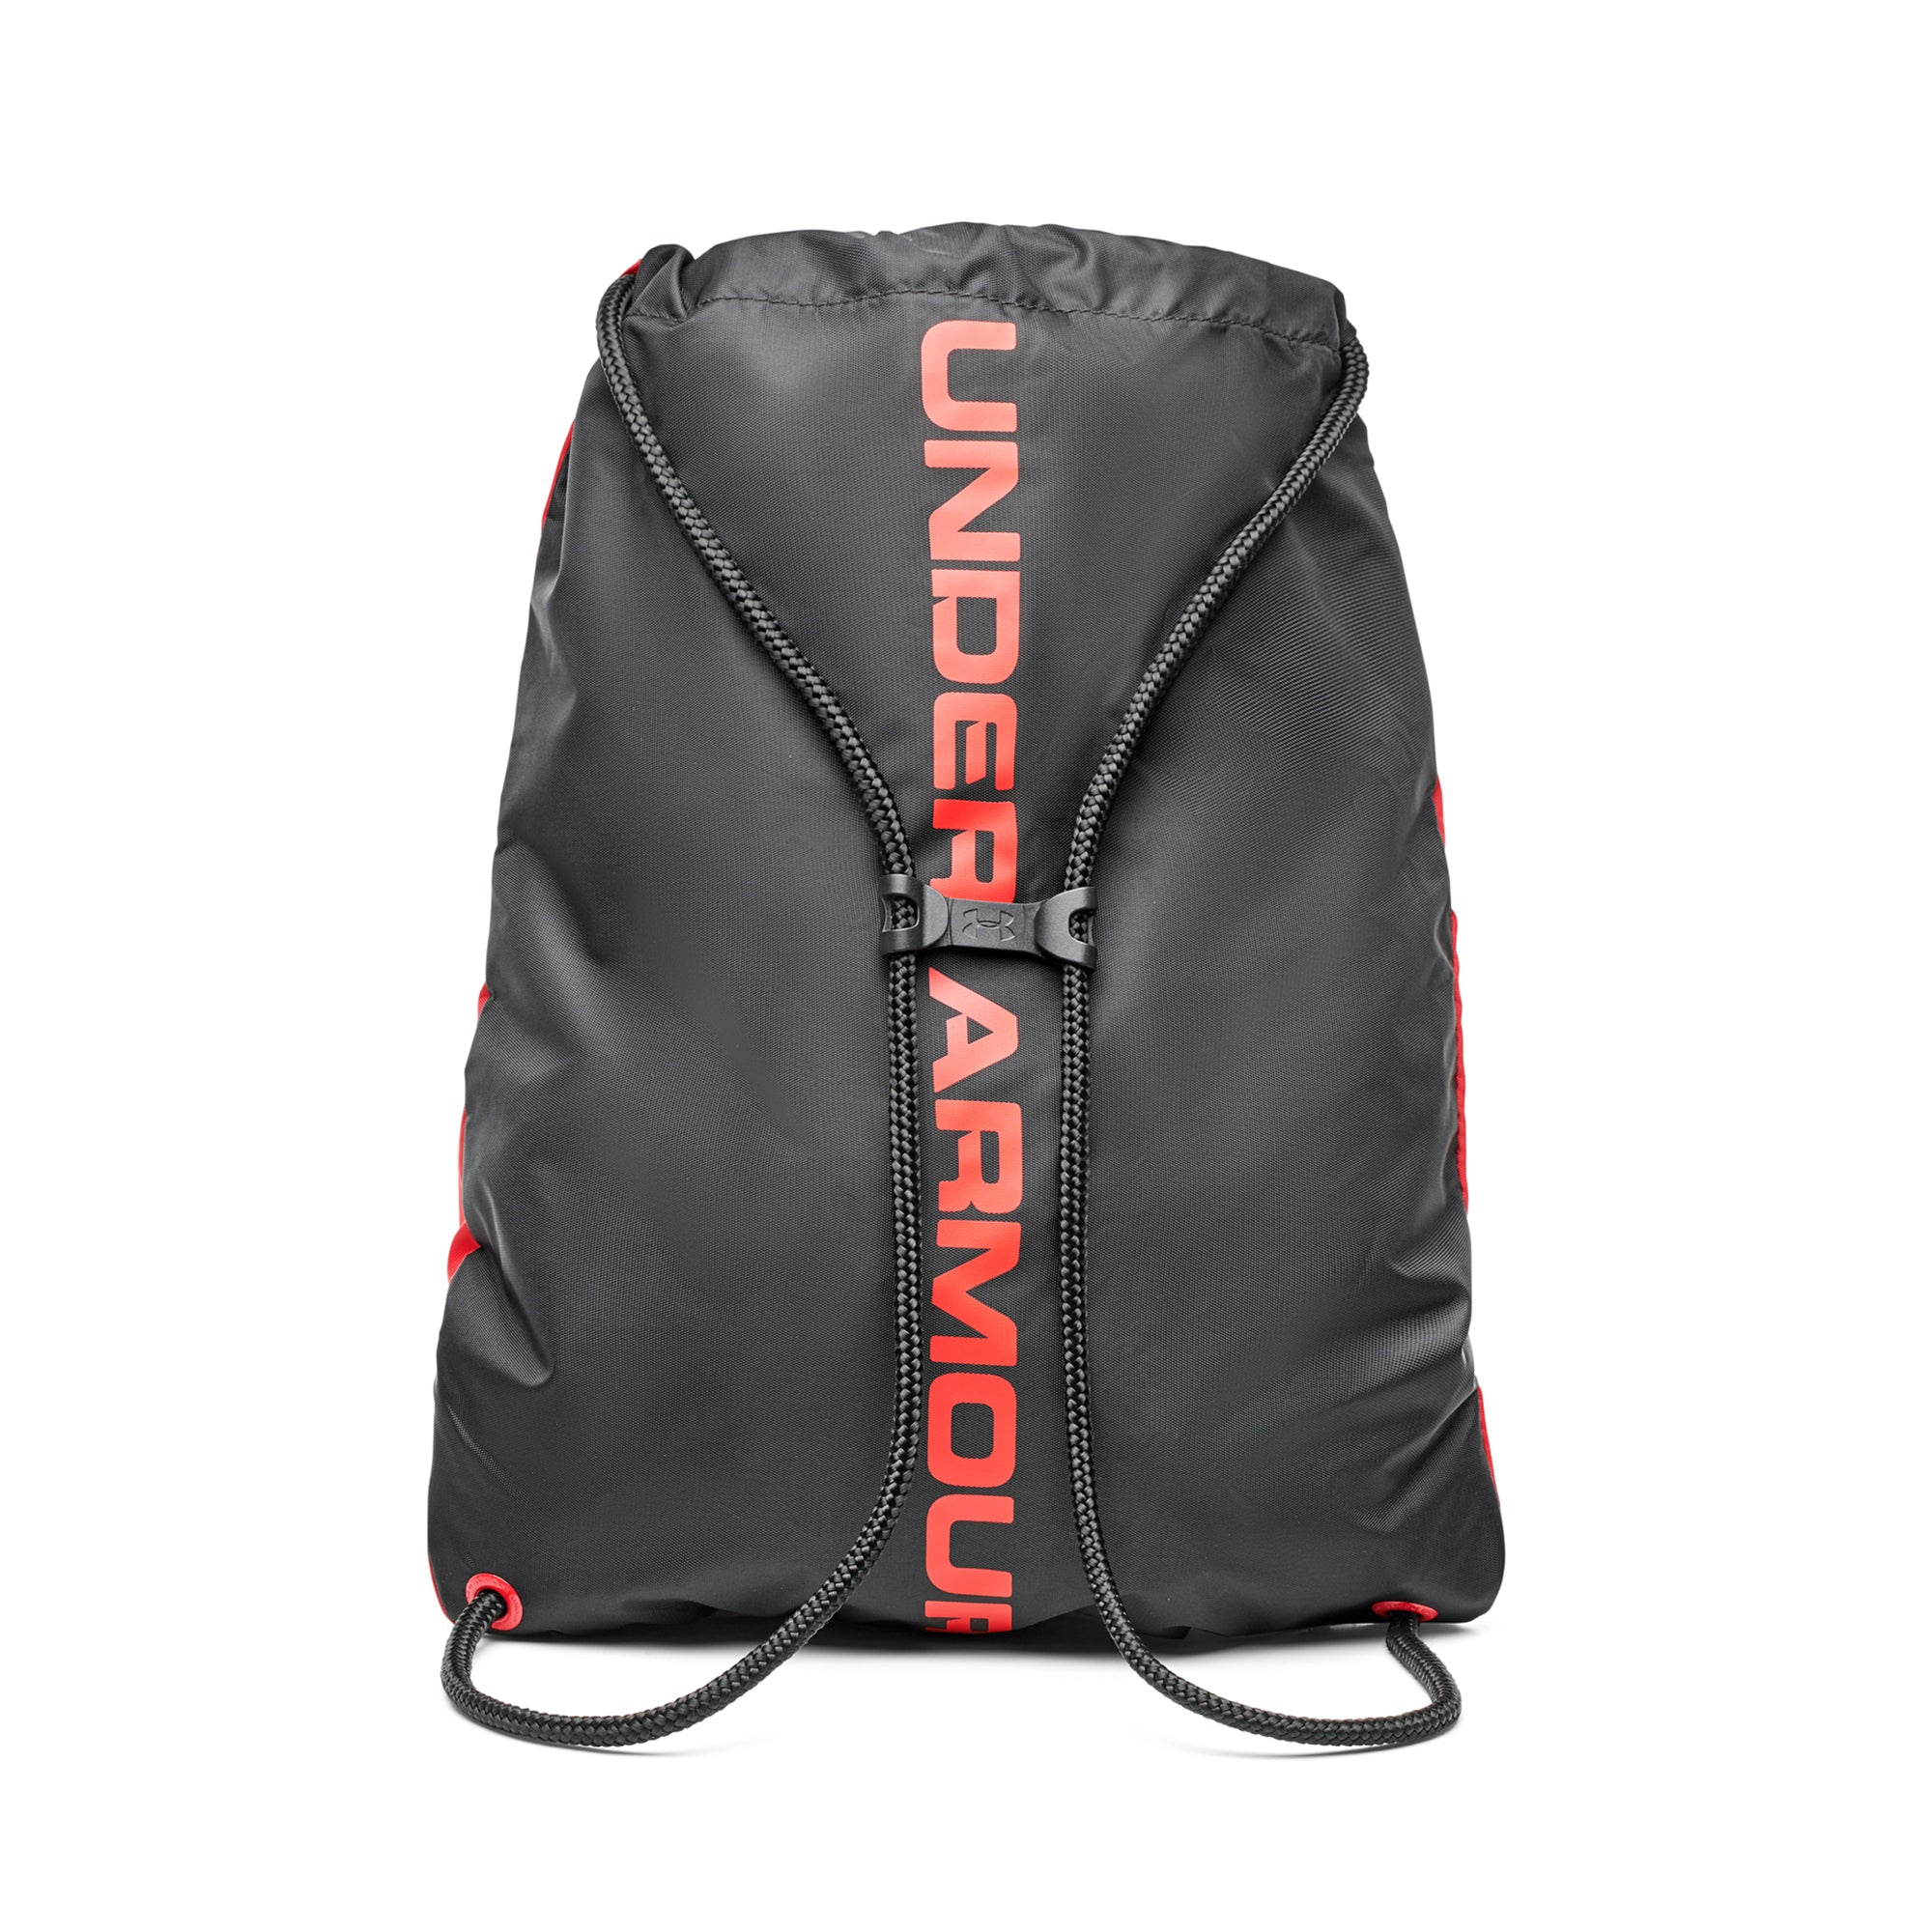  Under Armour Ozsee Sportpack - Embroidered C134989-E